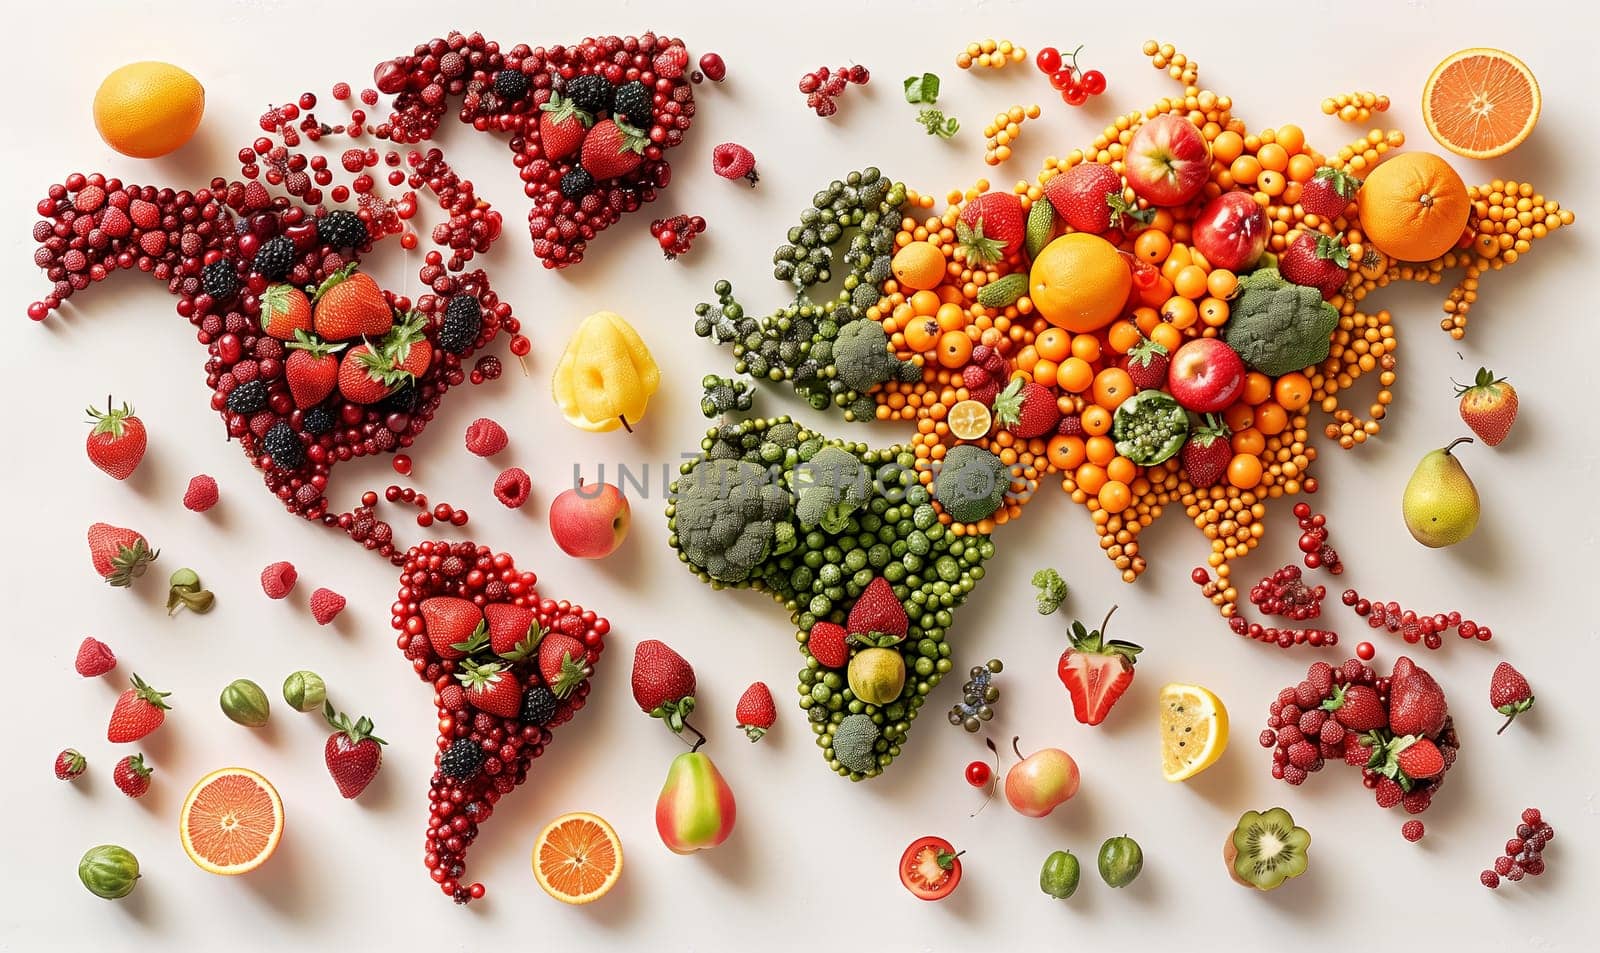 World map consisting of fruits and vegetables. Selective focus.